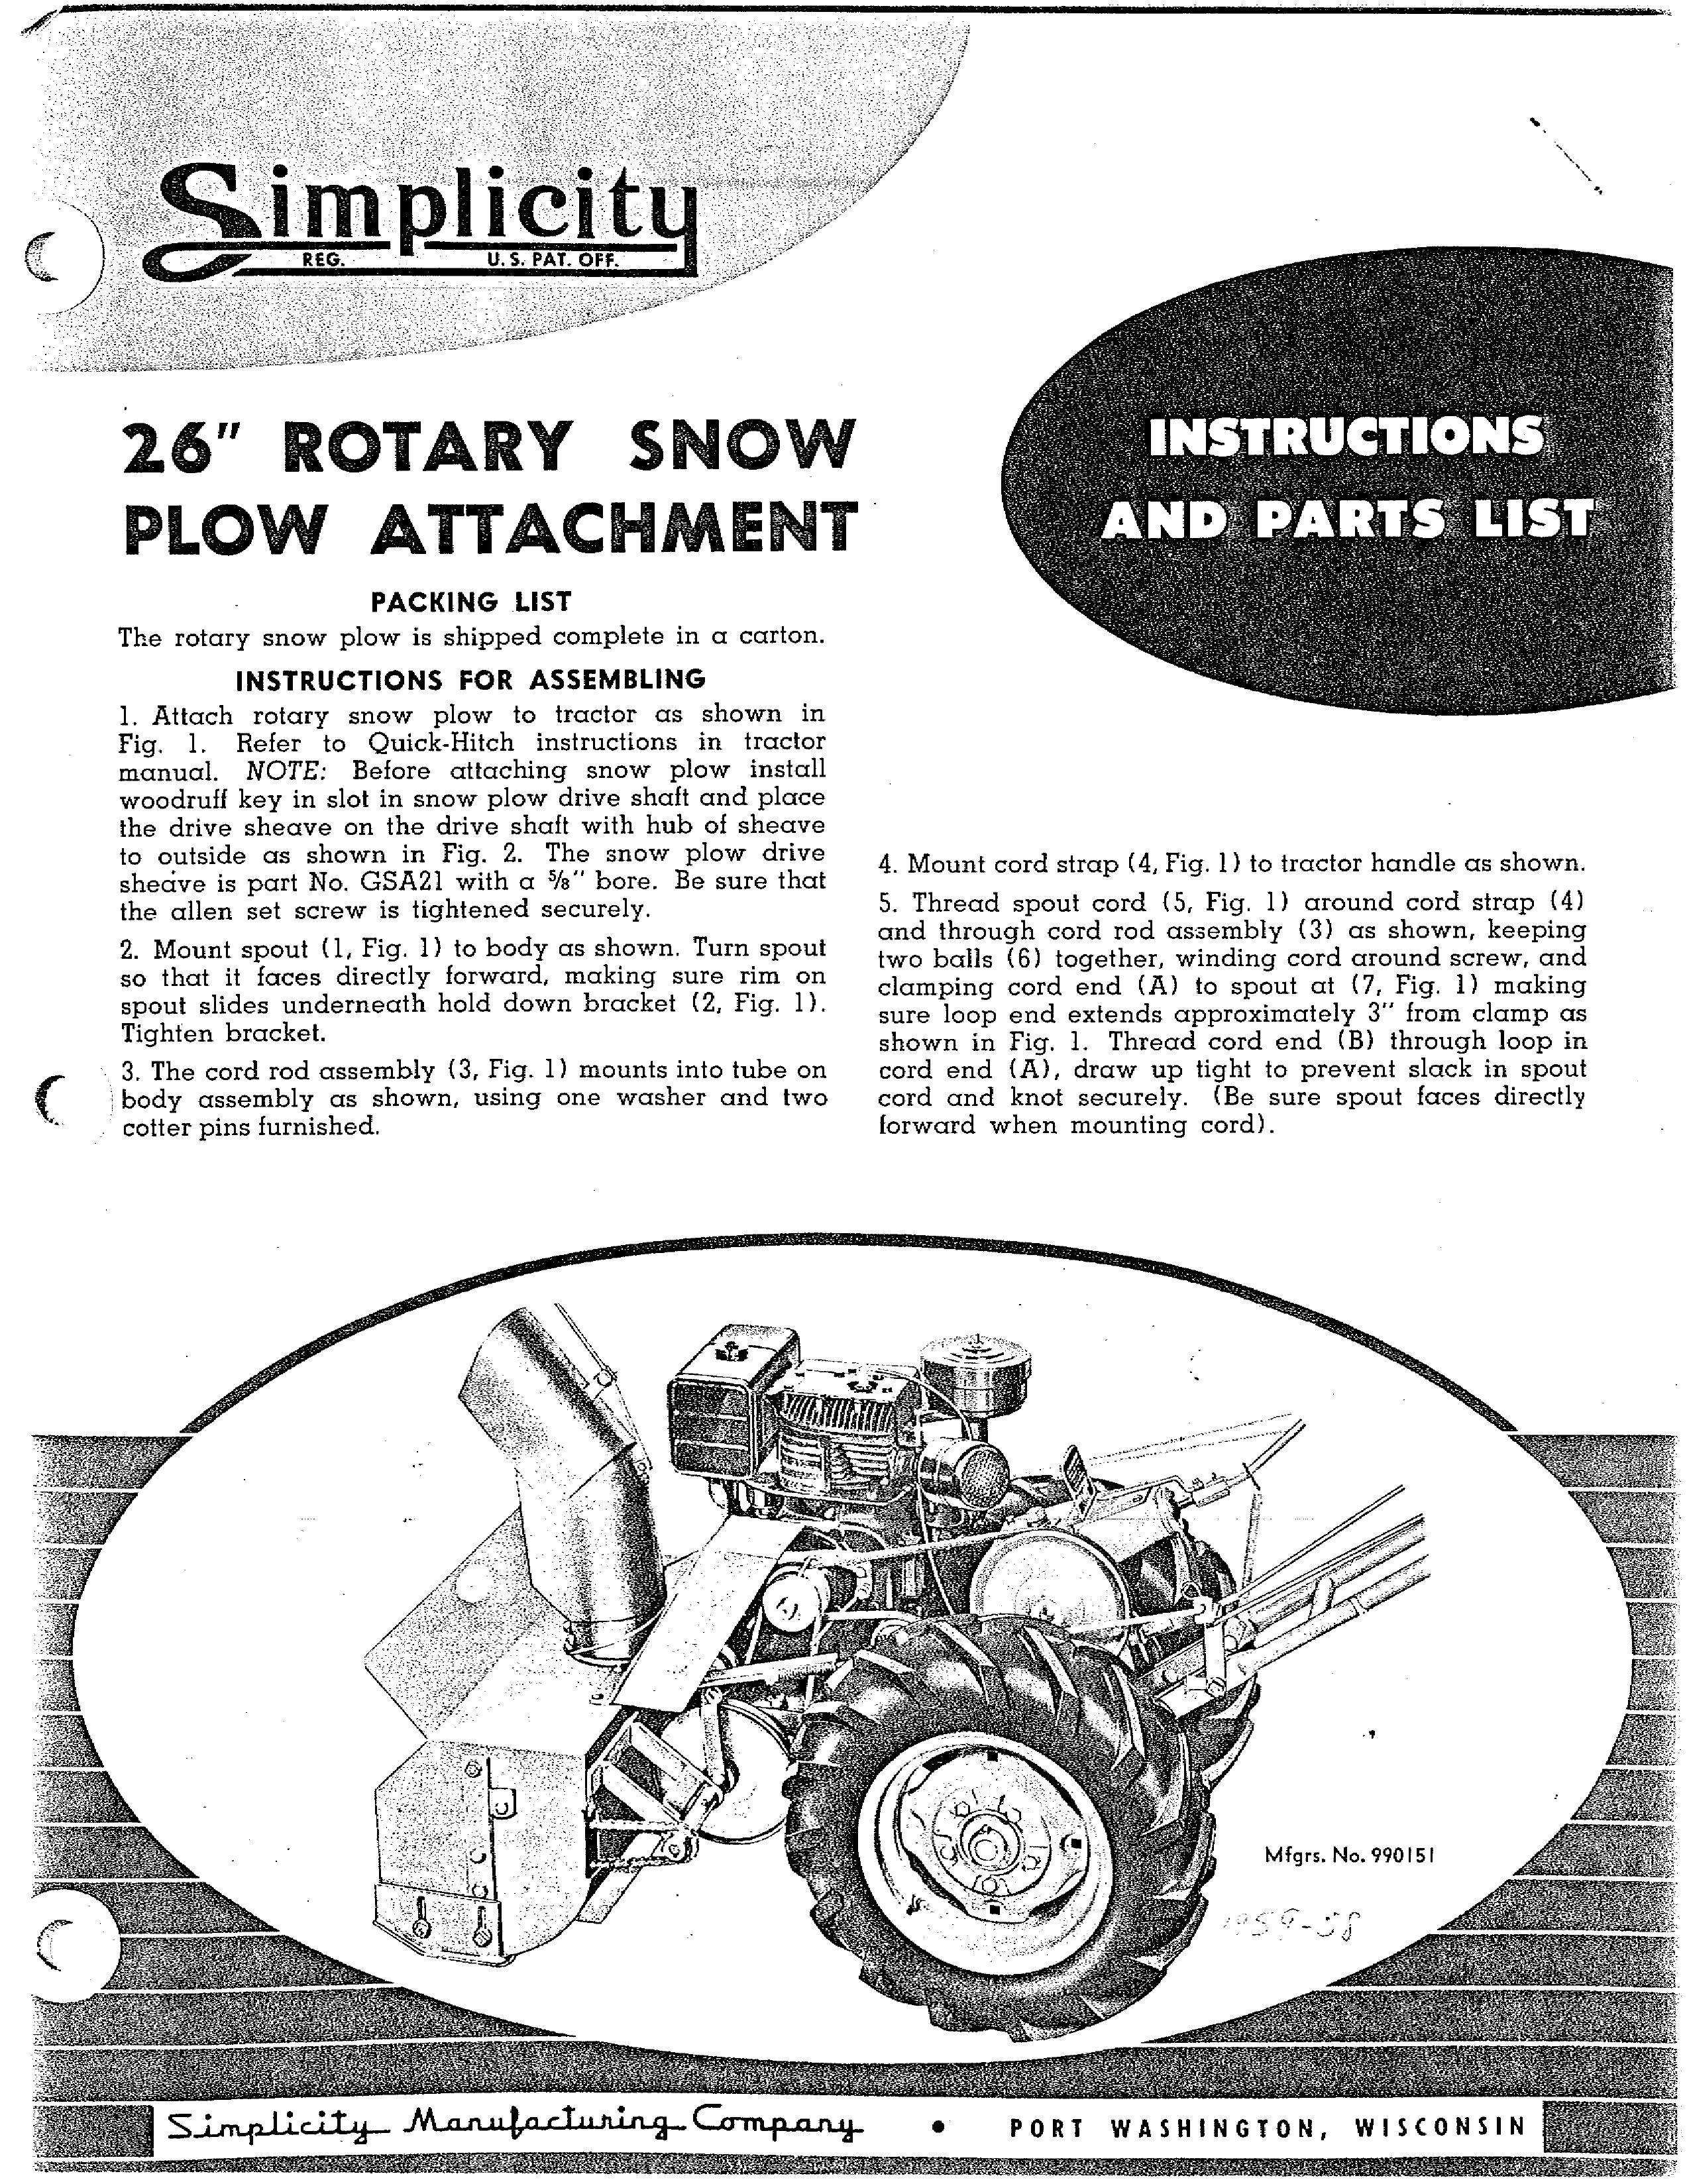 Simplicity 990151 Snow Blower Attachment User Manual